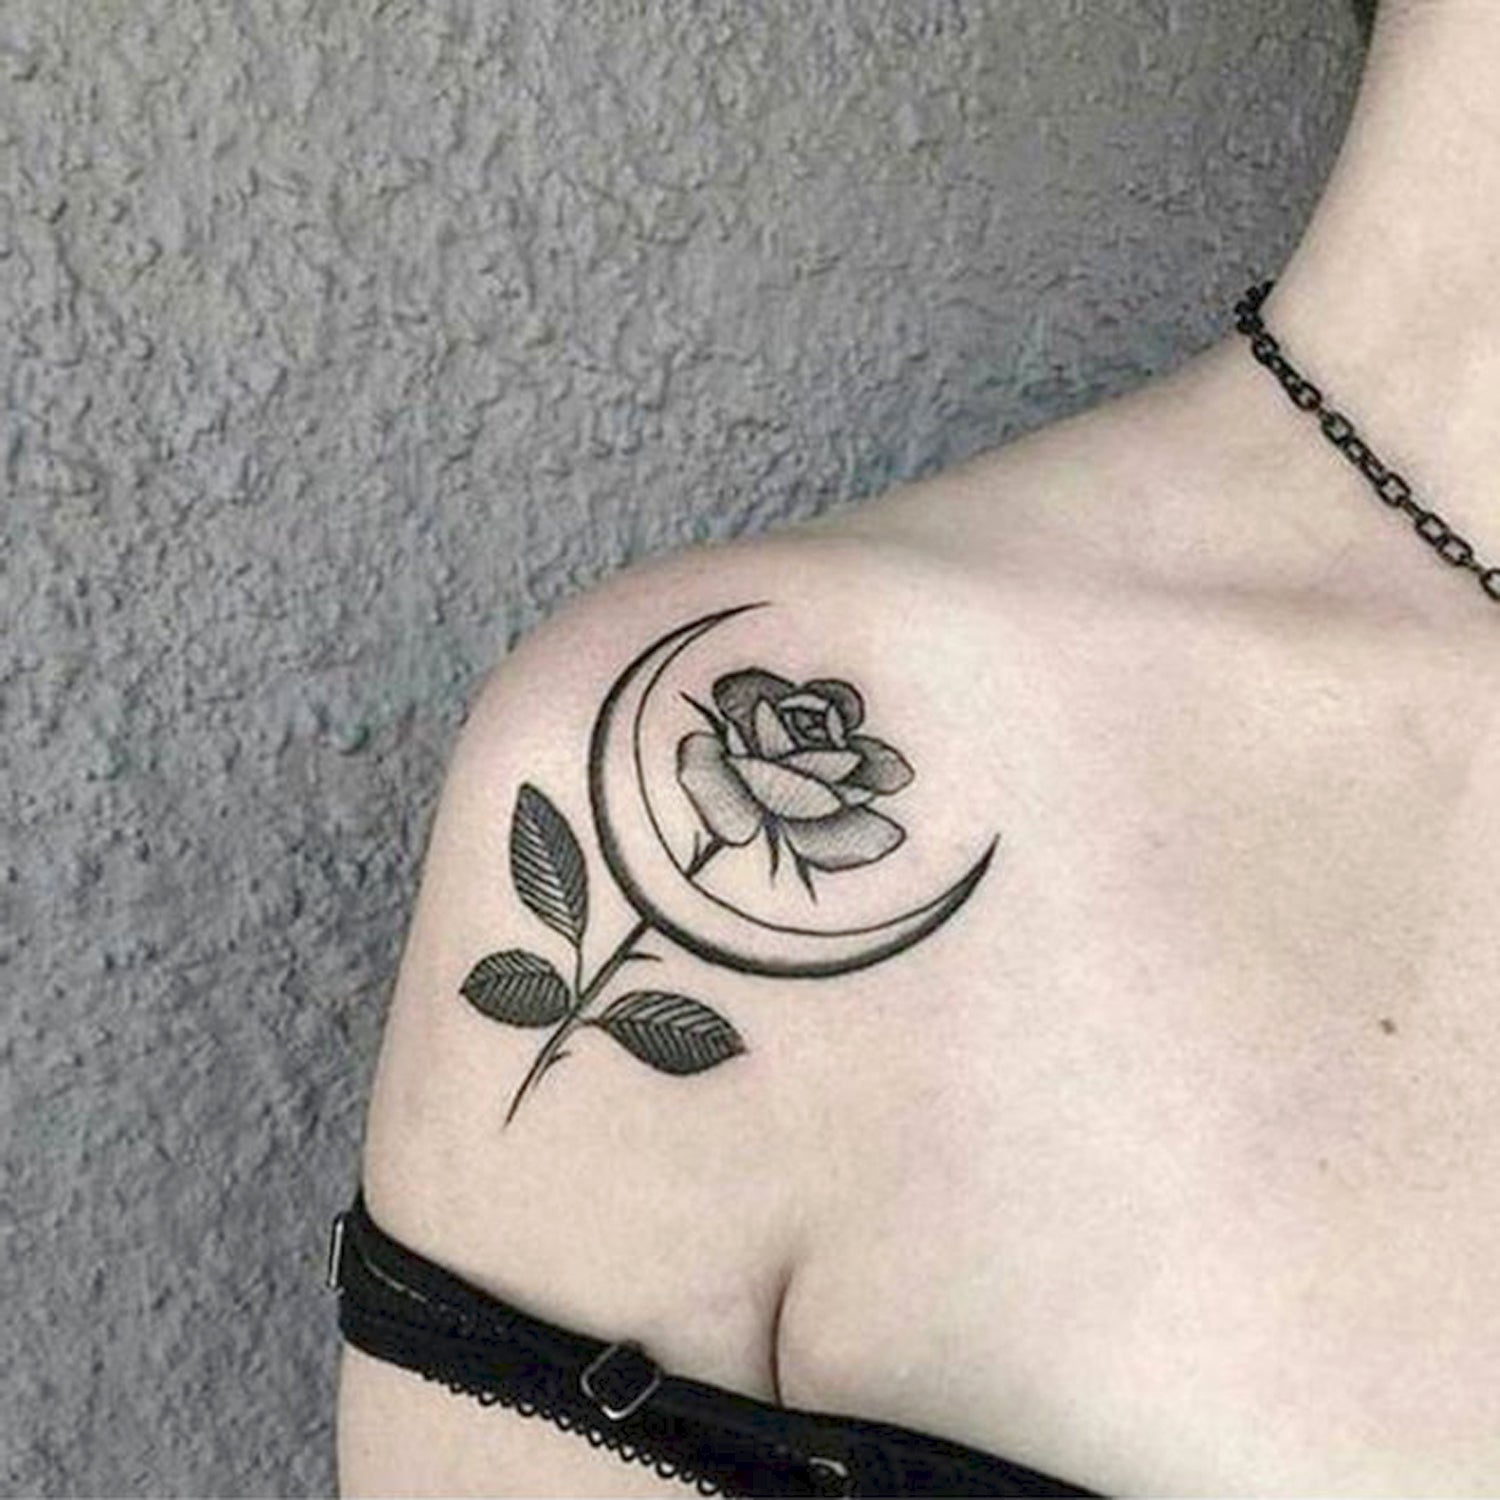 Buy Rose Blooming Temporary Tattoo / Small Rose Tattoo / Rose Outline /  Flower Tattoo / Floral Tattoo Online in India - Etsy